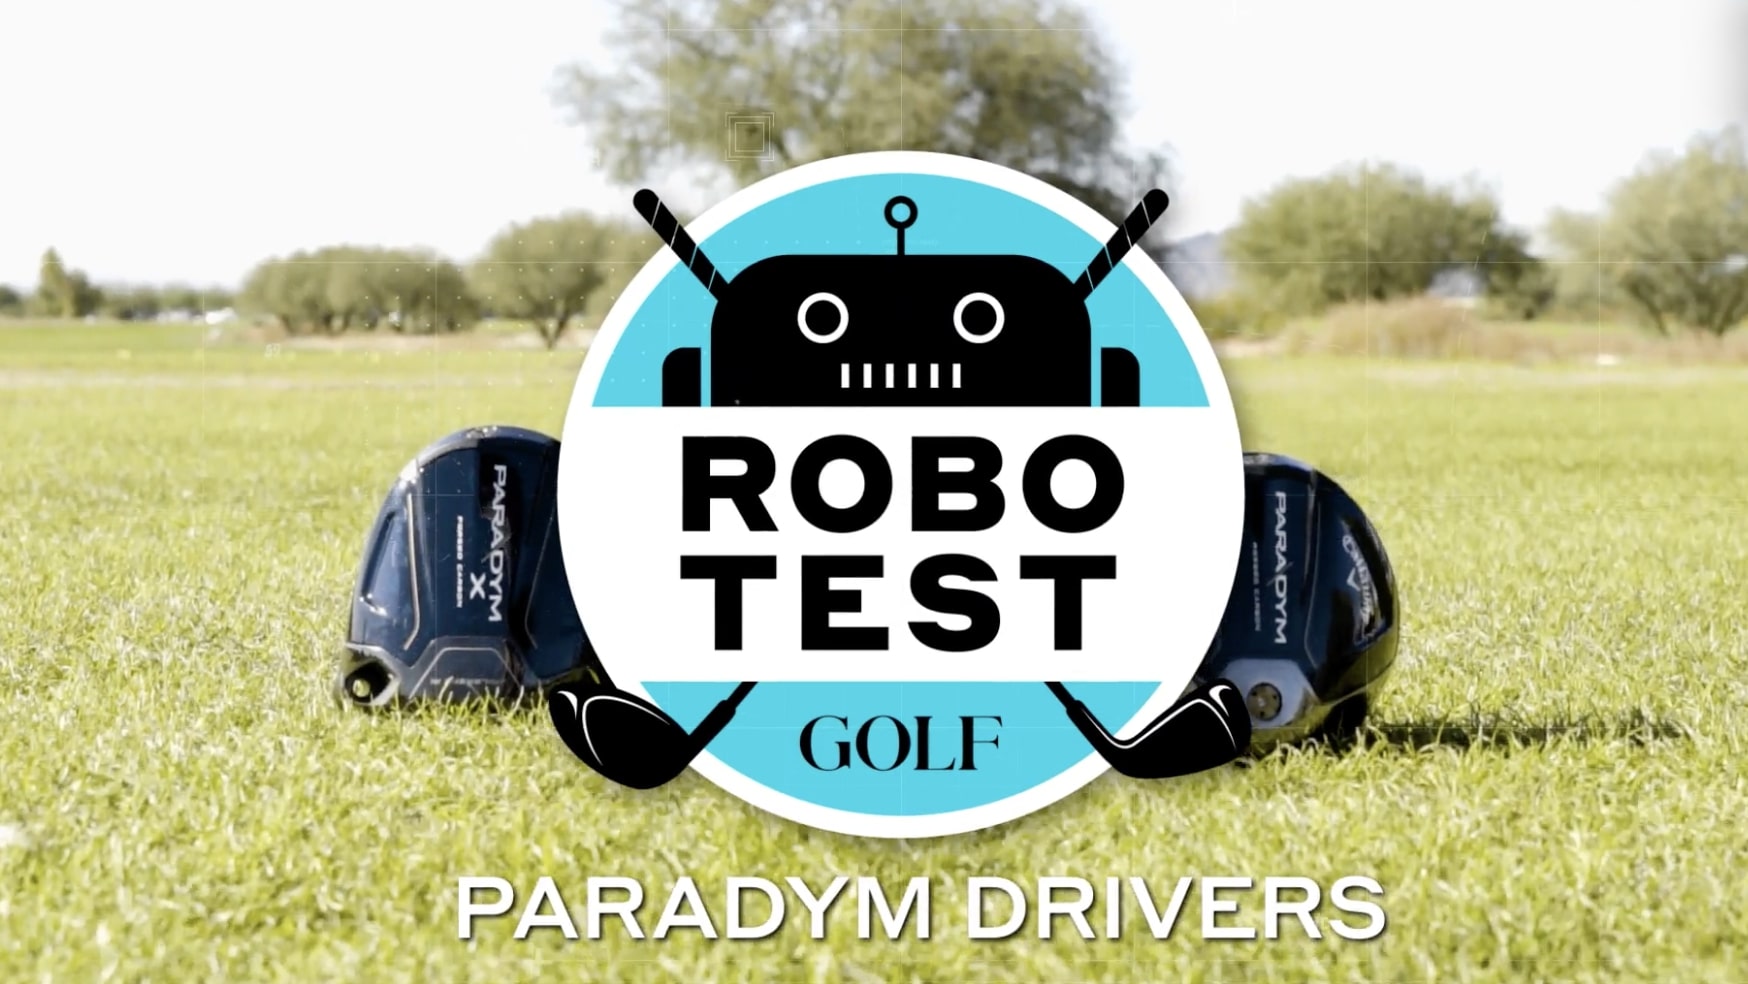 How did Callaway's new Paradym line fair in our RoboTest?